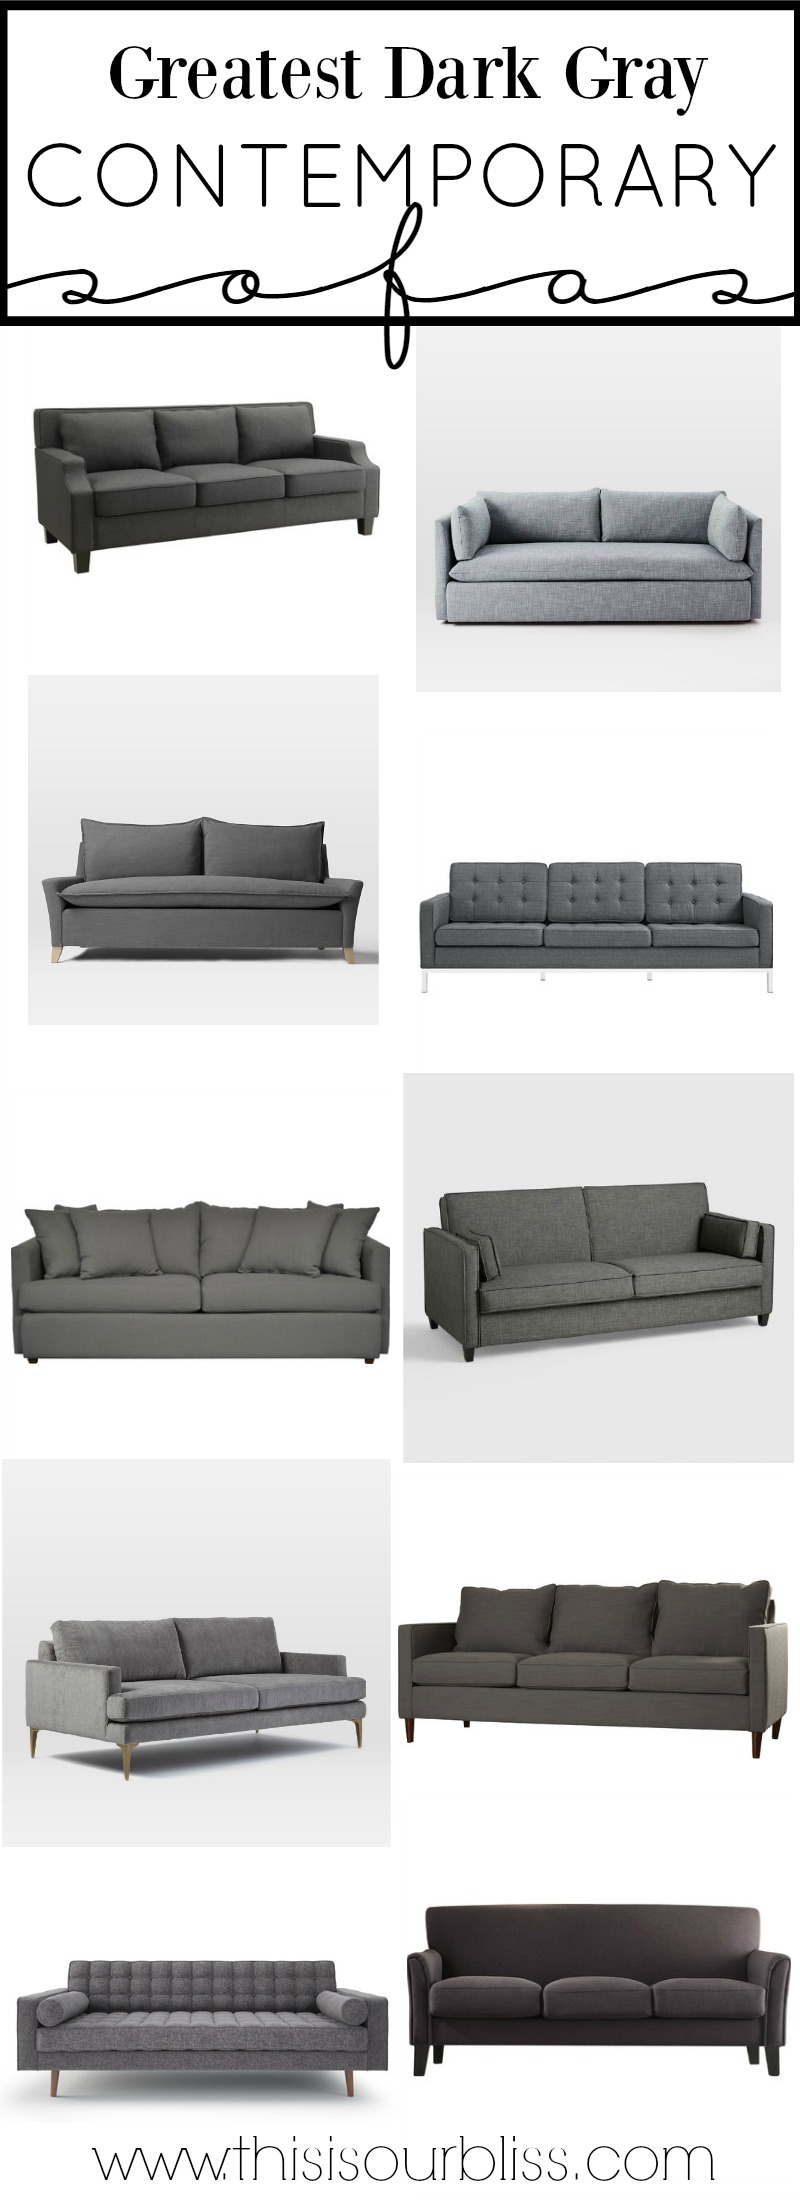 The Greatest Dark Gray Contemporary Sofa Round-up + How to Style a Sofa 2 Different Ways | This is our Bliss